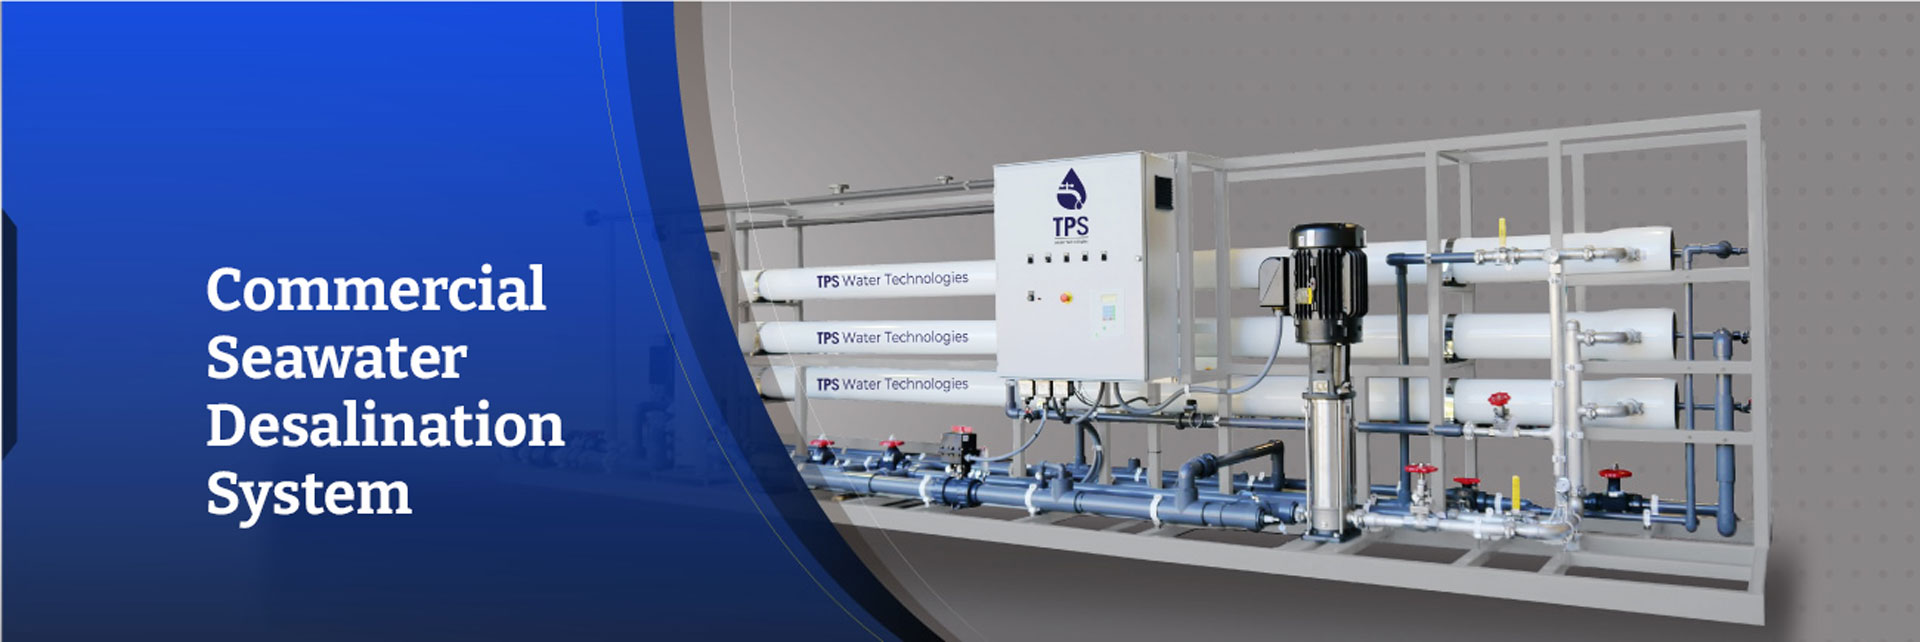 Commercial Seawater Desalination System